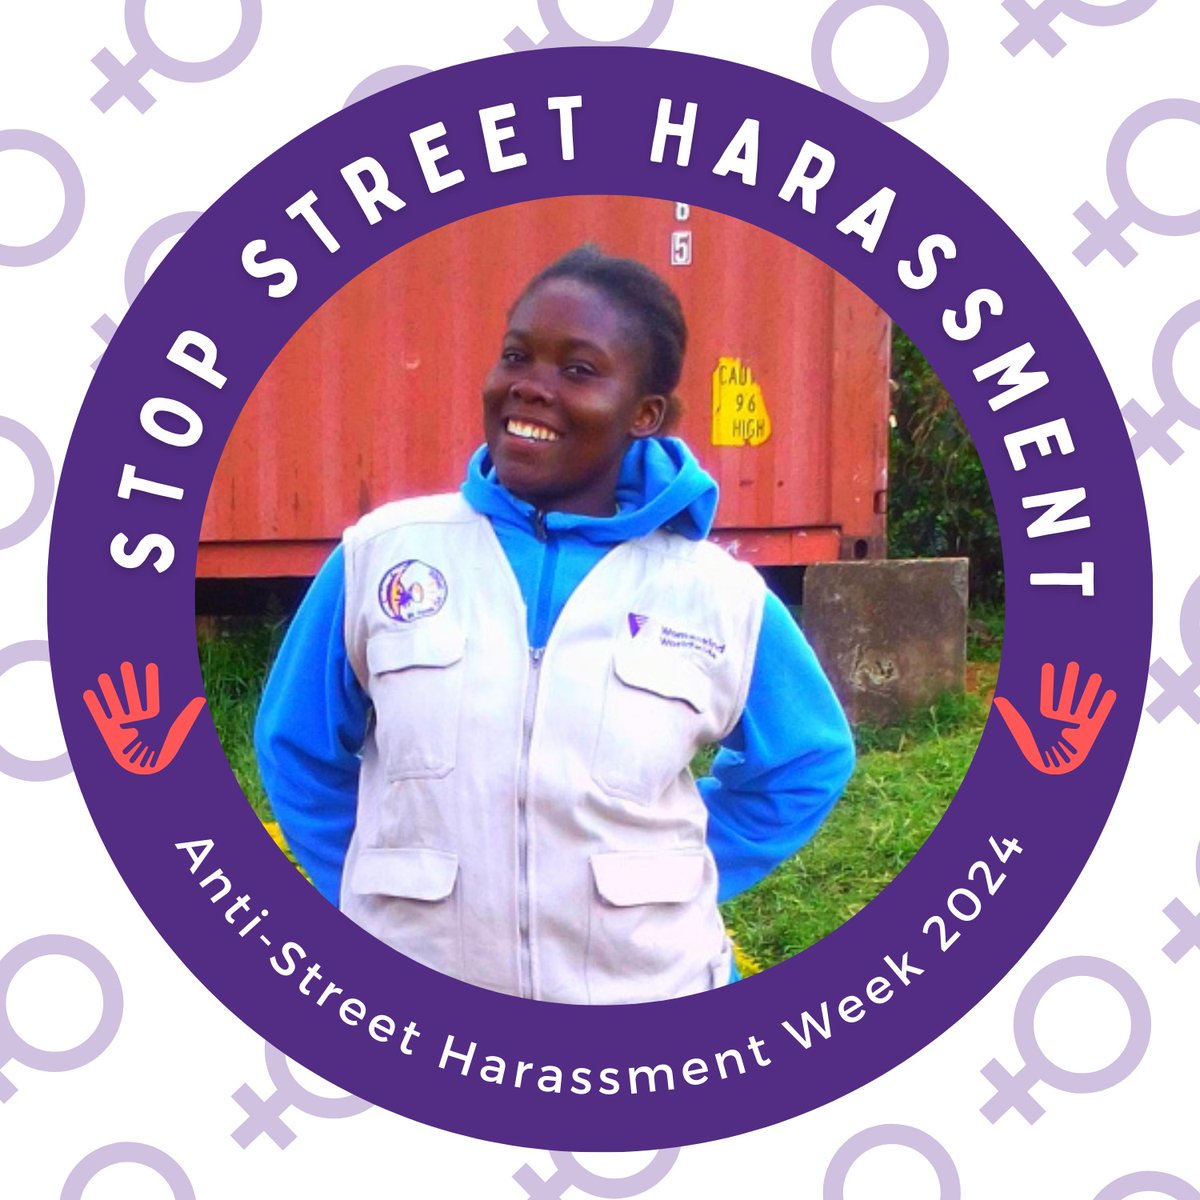 It's a special week having international street harassment ,as we create awereness we stand out raising our voices to stop sexual harassment and let's advocate to speak out
@polycomdev
@TheSafecity
#StopStreetHarassment 
#AntiSHweek2024
#Safecity
#polycomspeaks